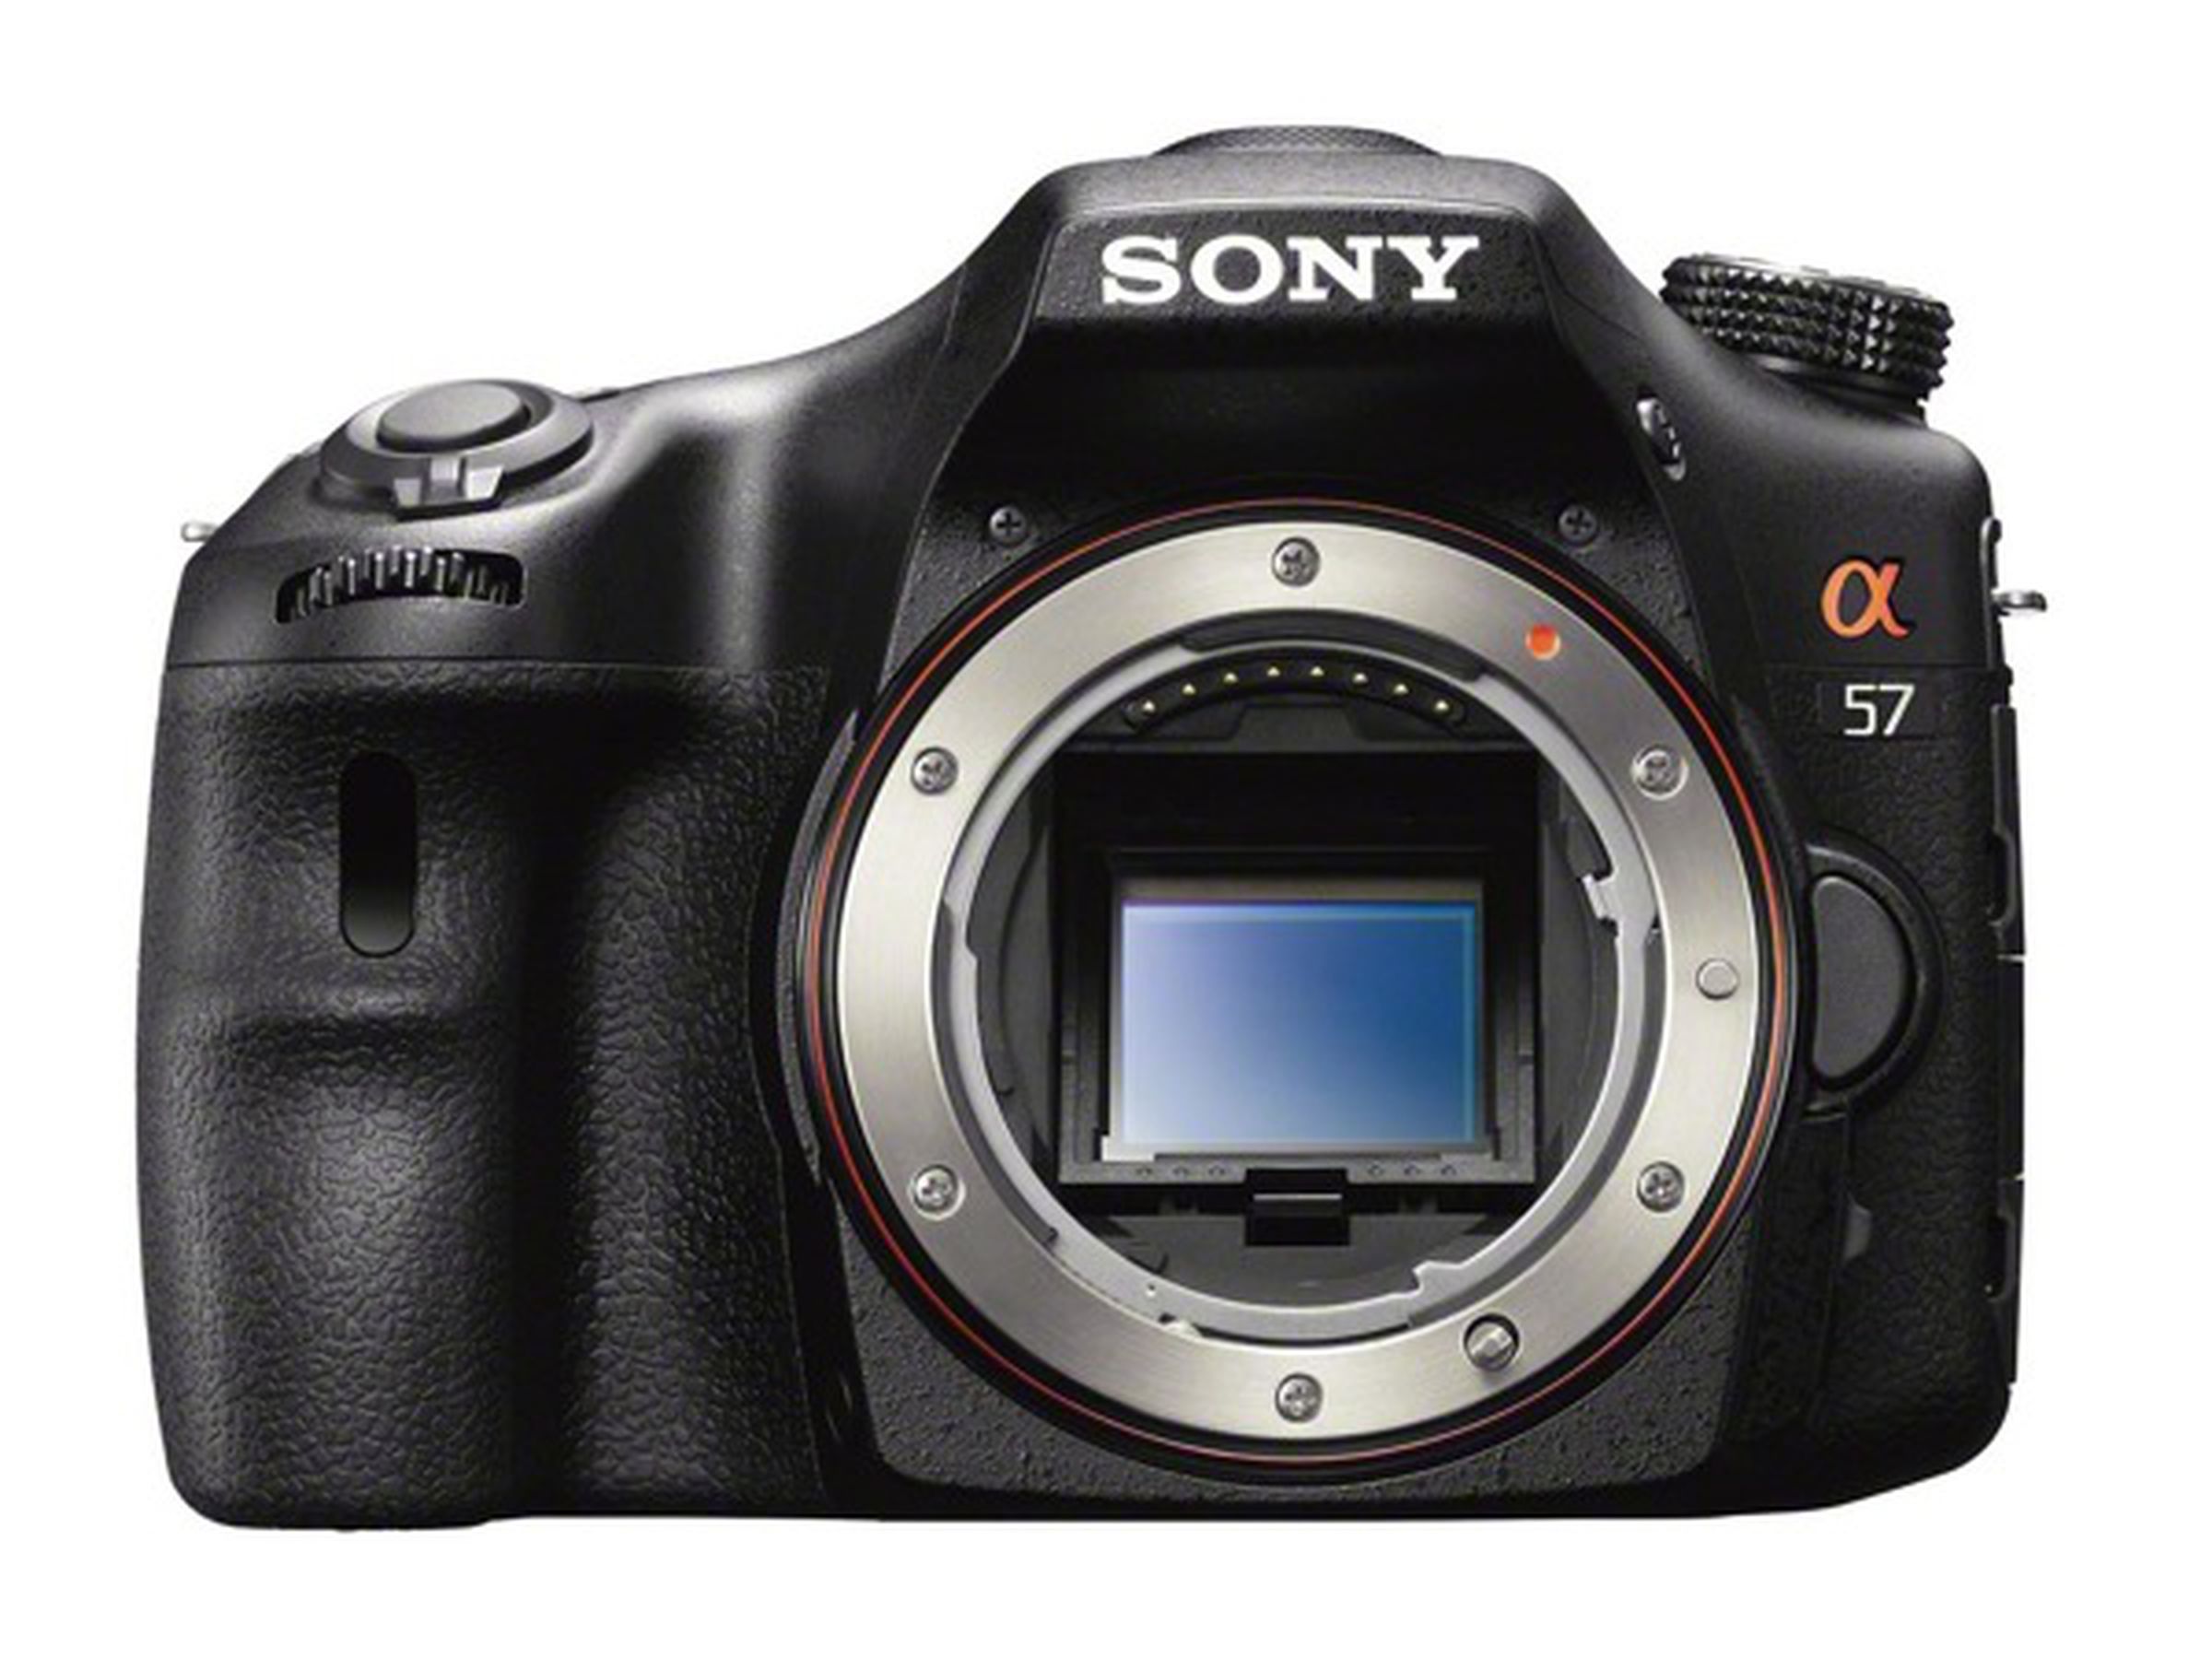 Sony A57 press images